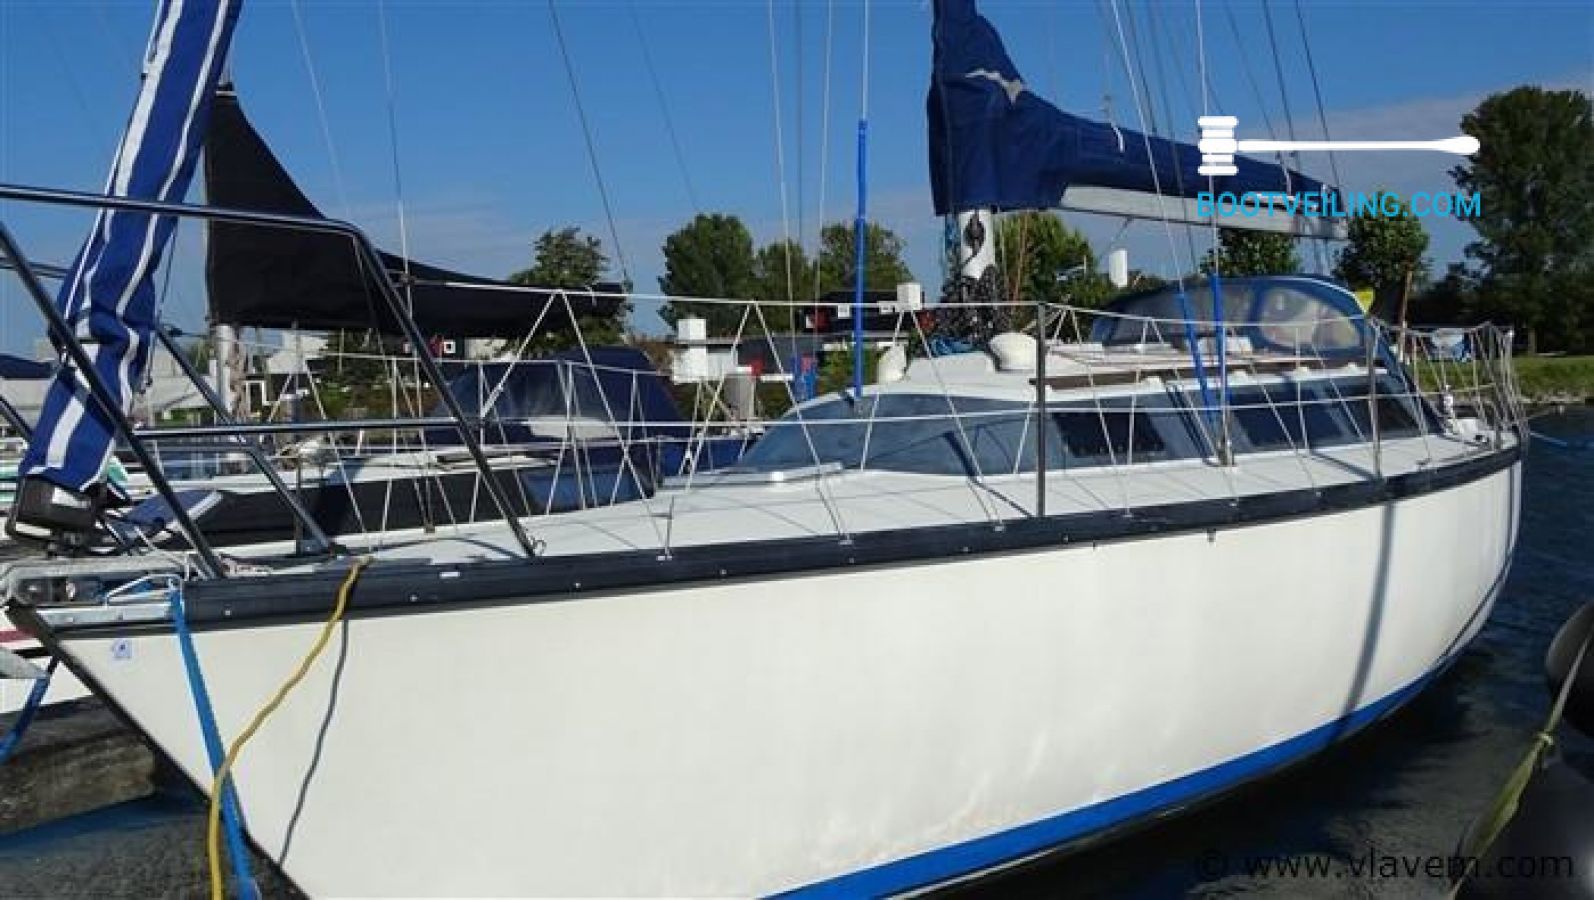 dufour 29 sailboat for sale